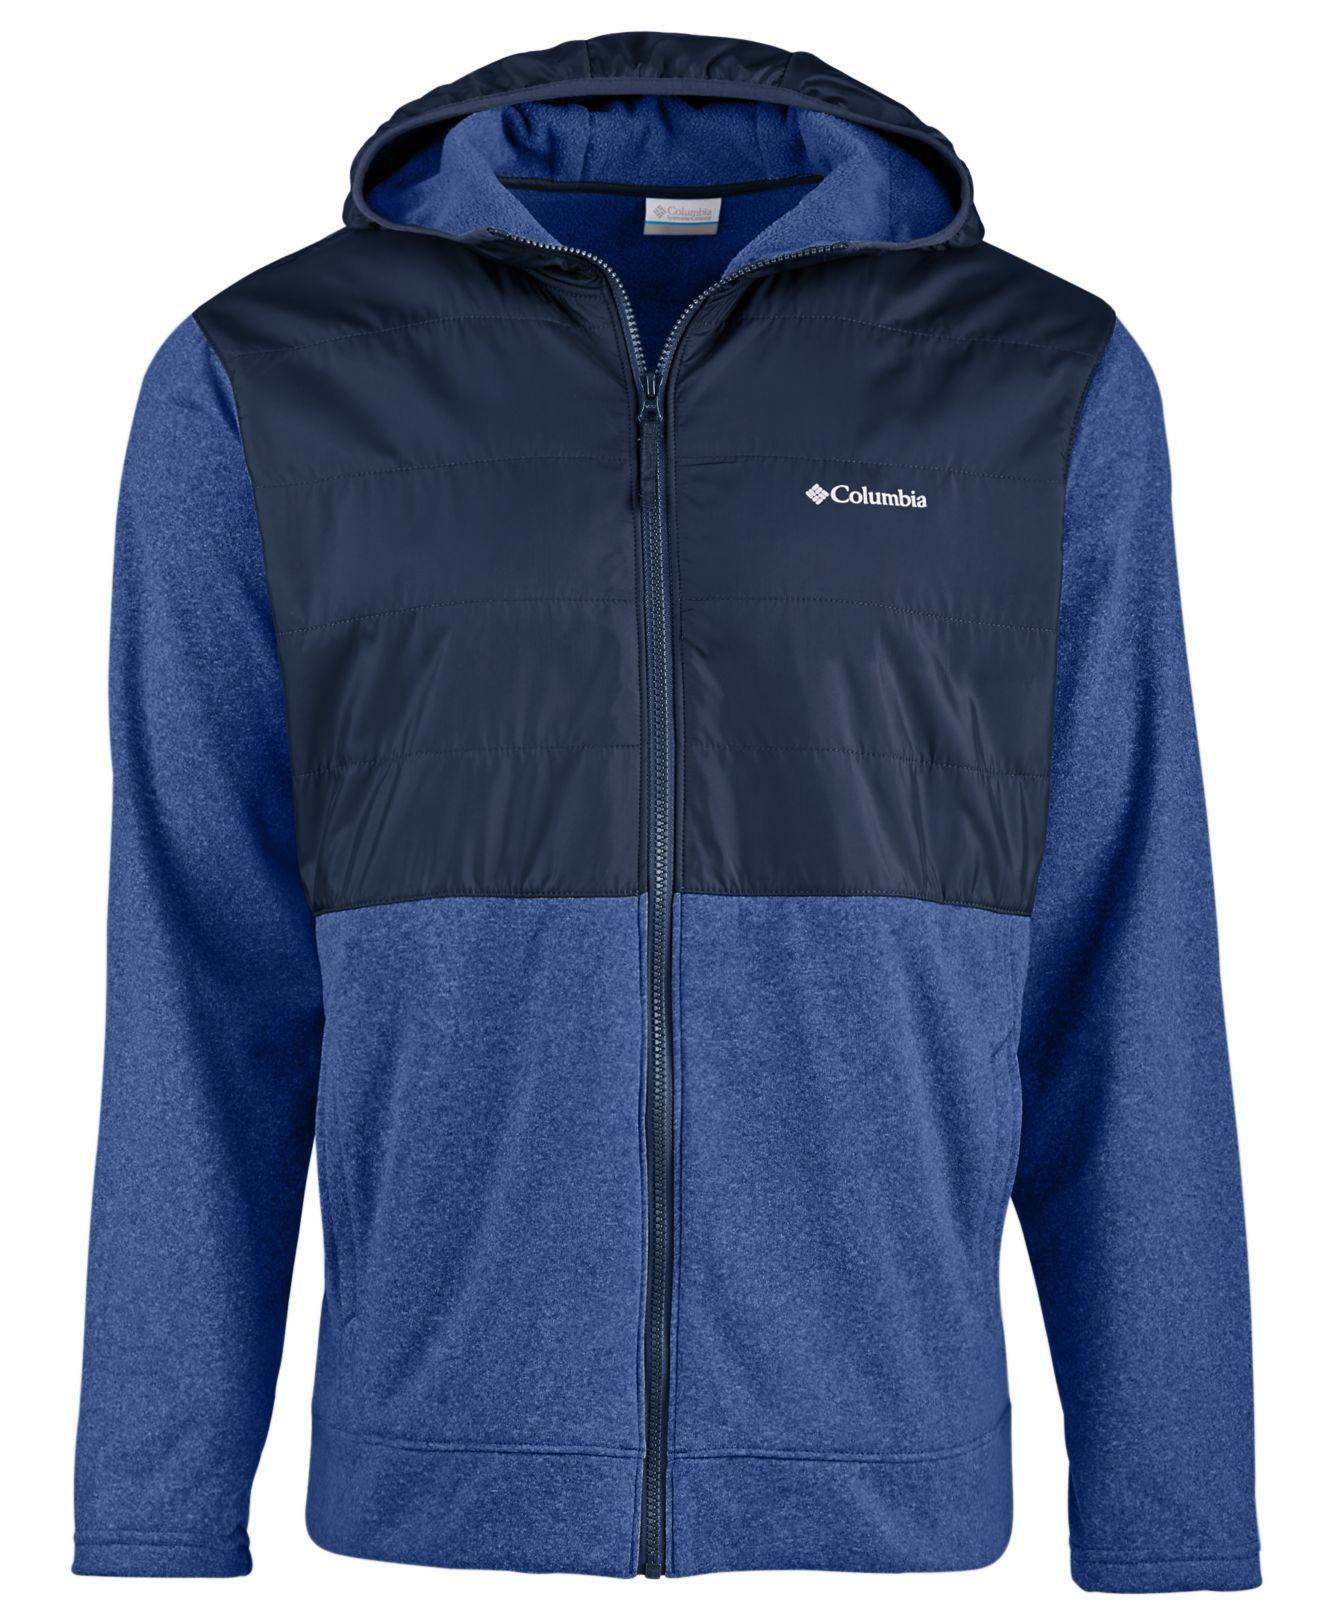 Lyst - Columbia Mens Hybrid Zip-front Hooded Jacket in Blue for Men